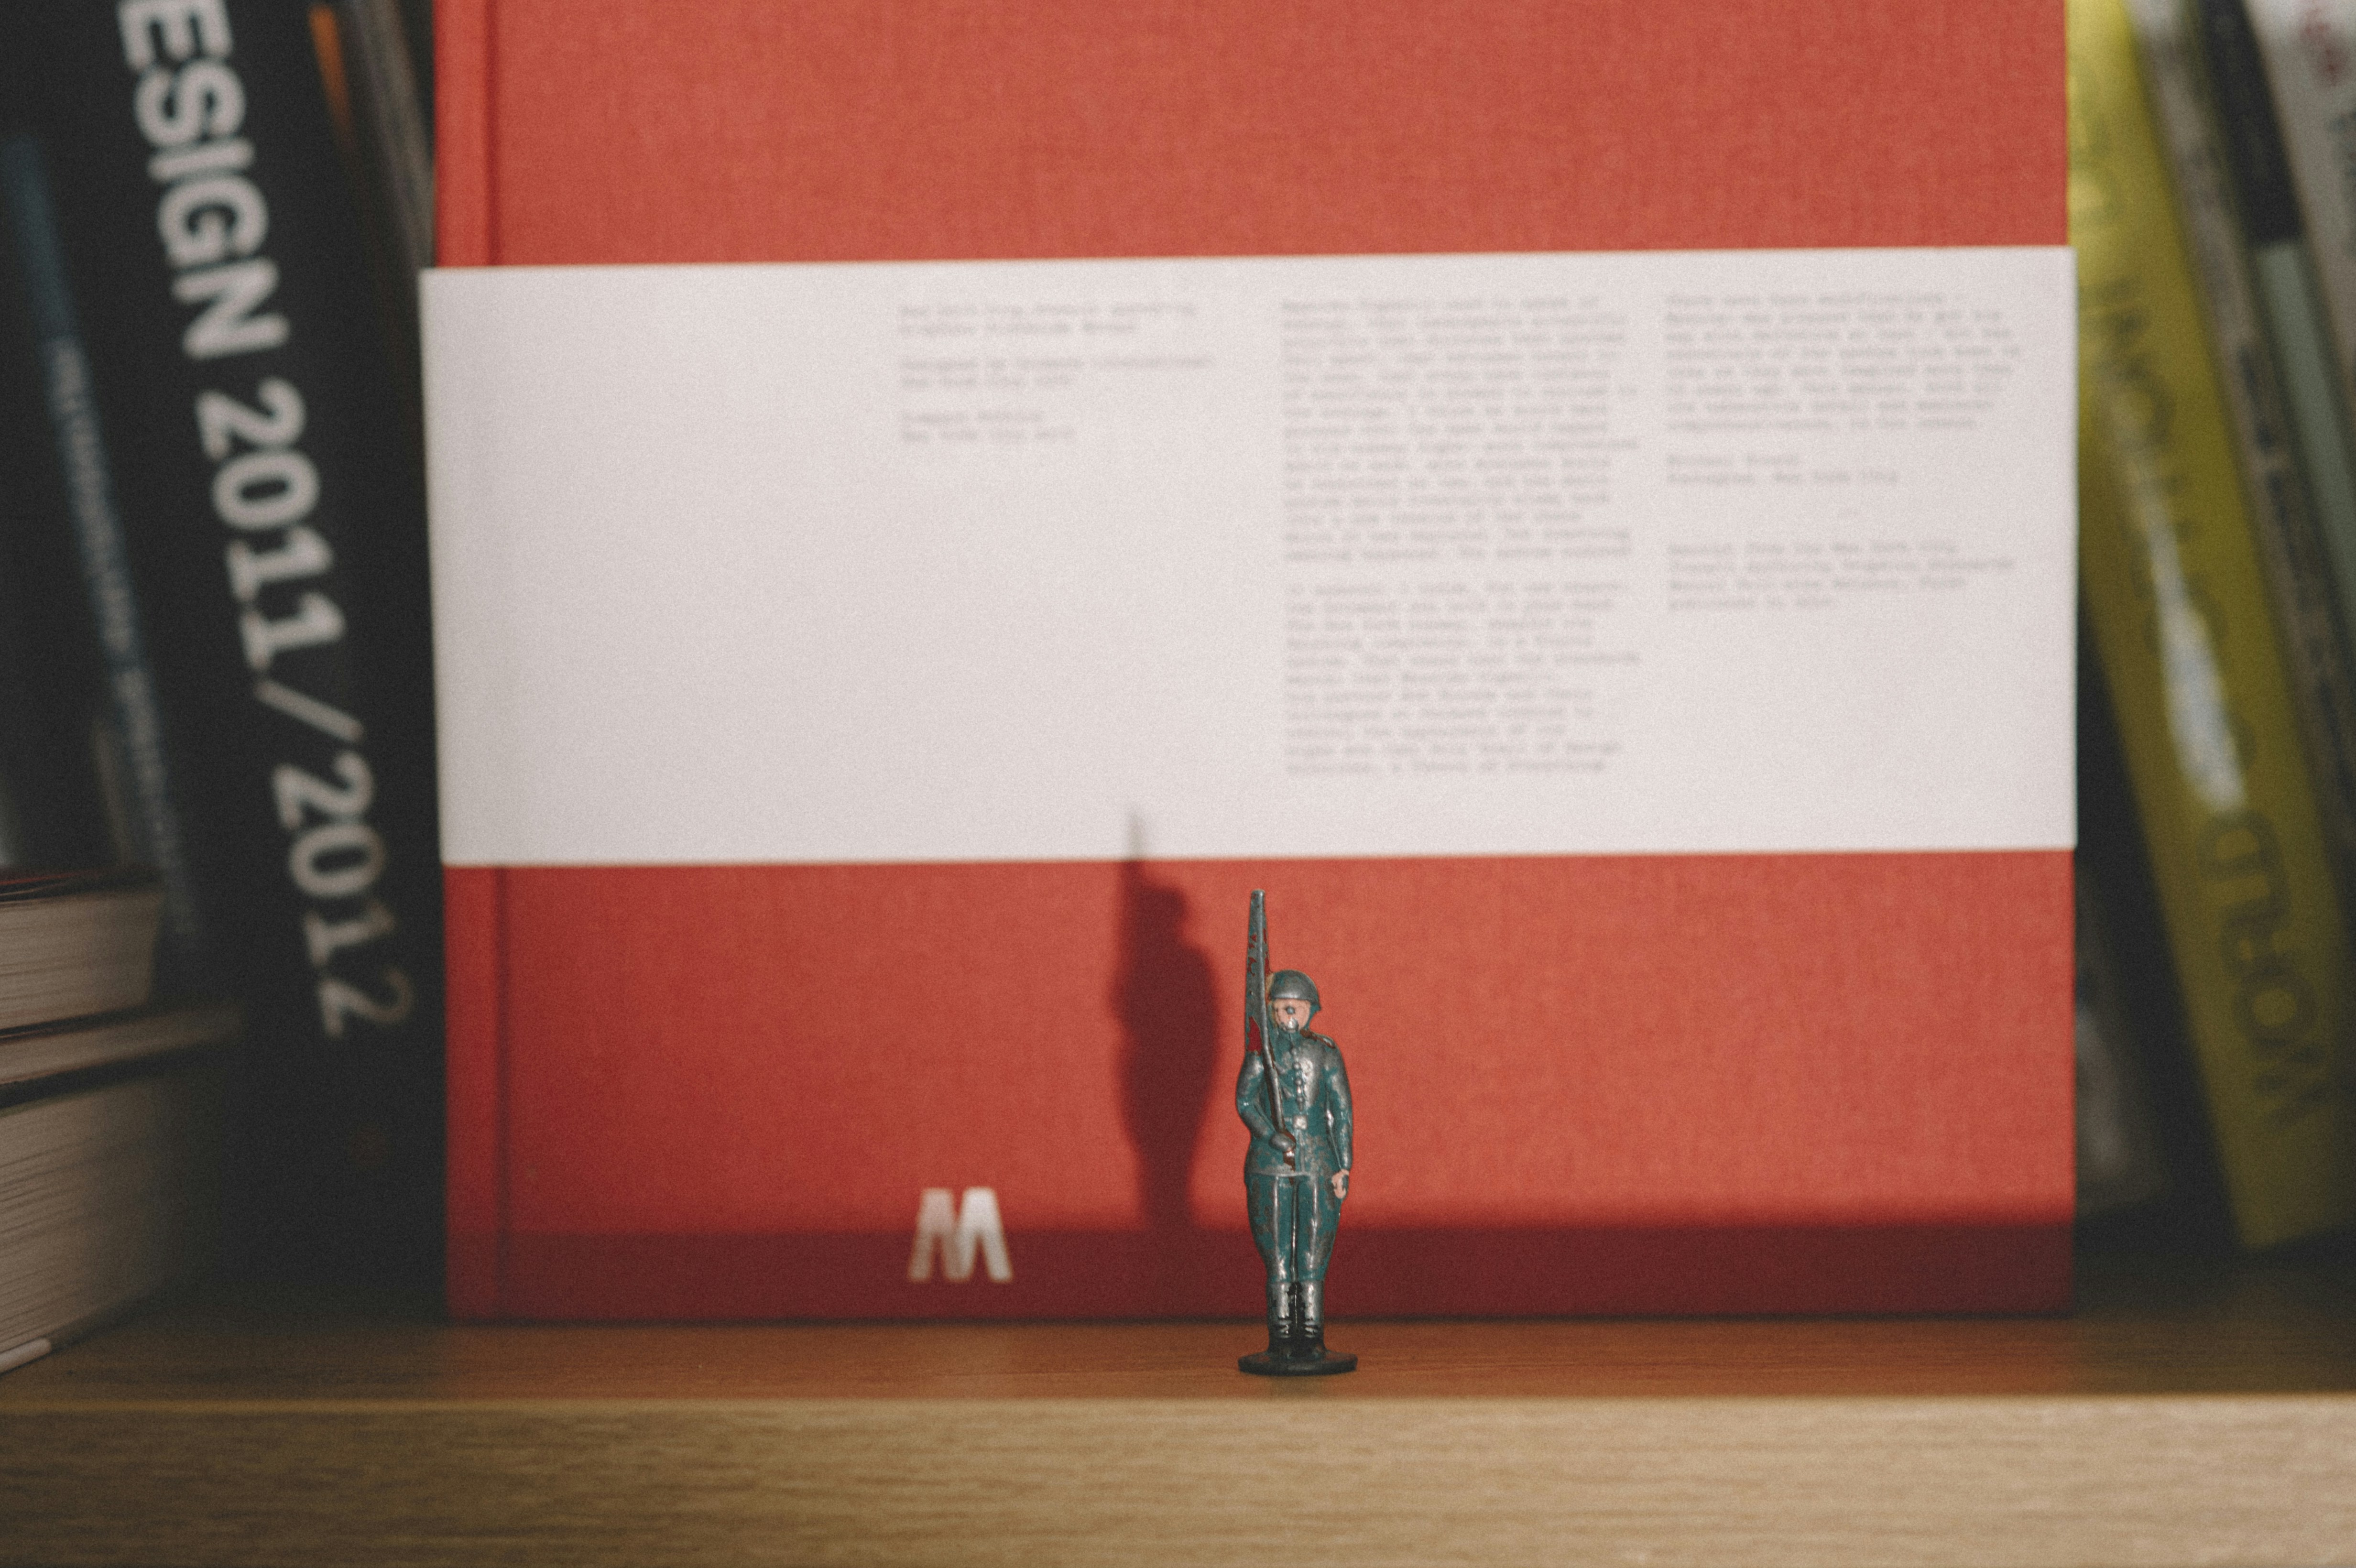 A toy soldier stands at attention on a bookshelf.